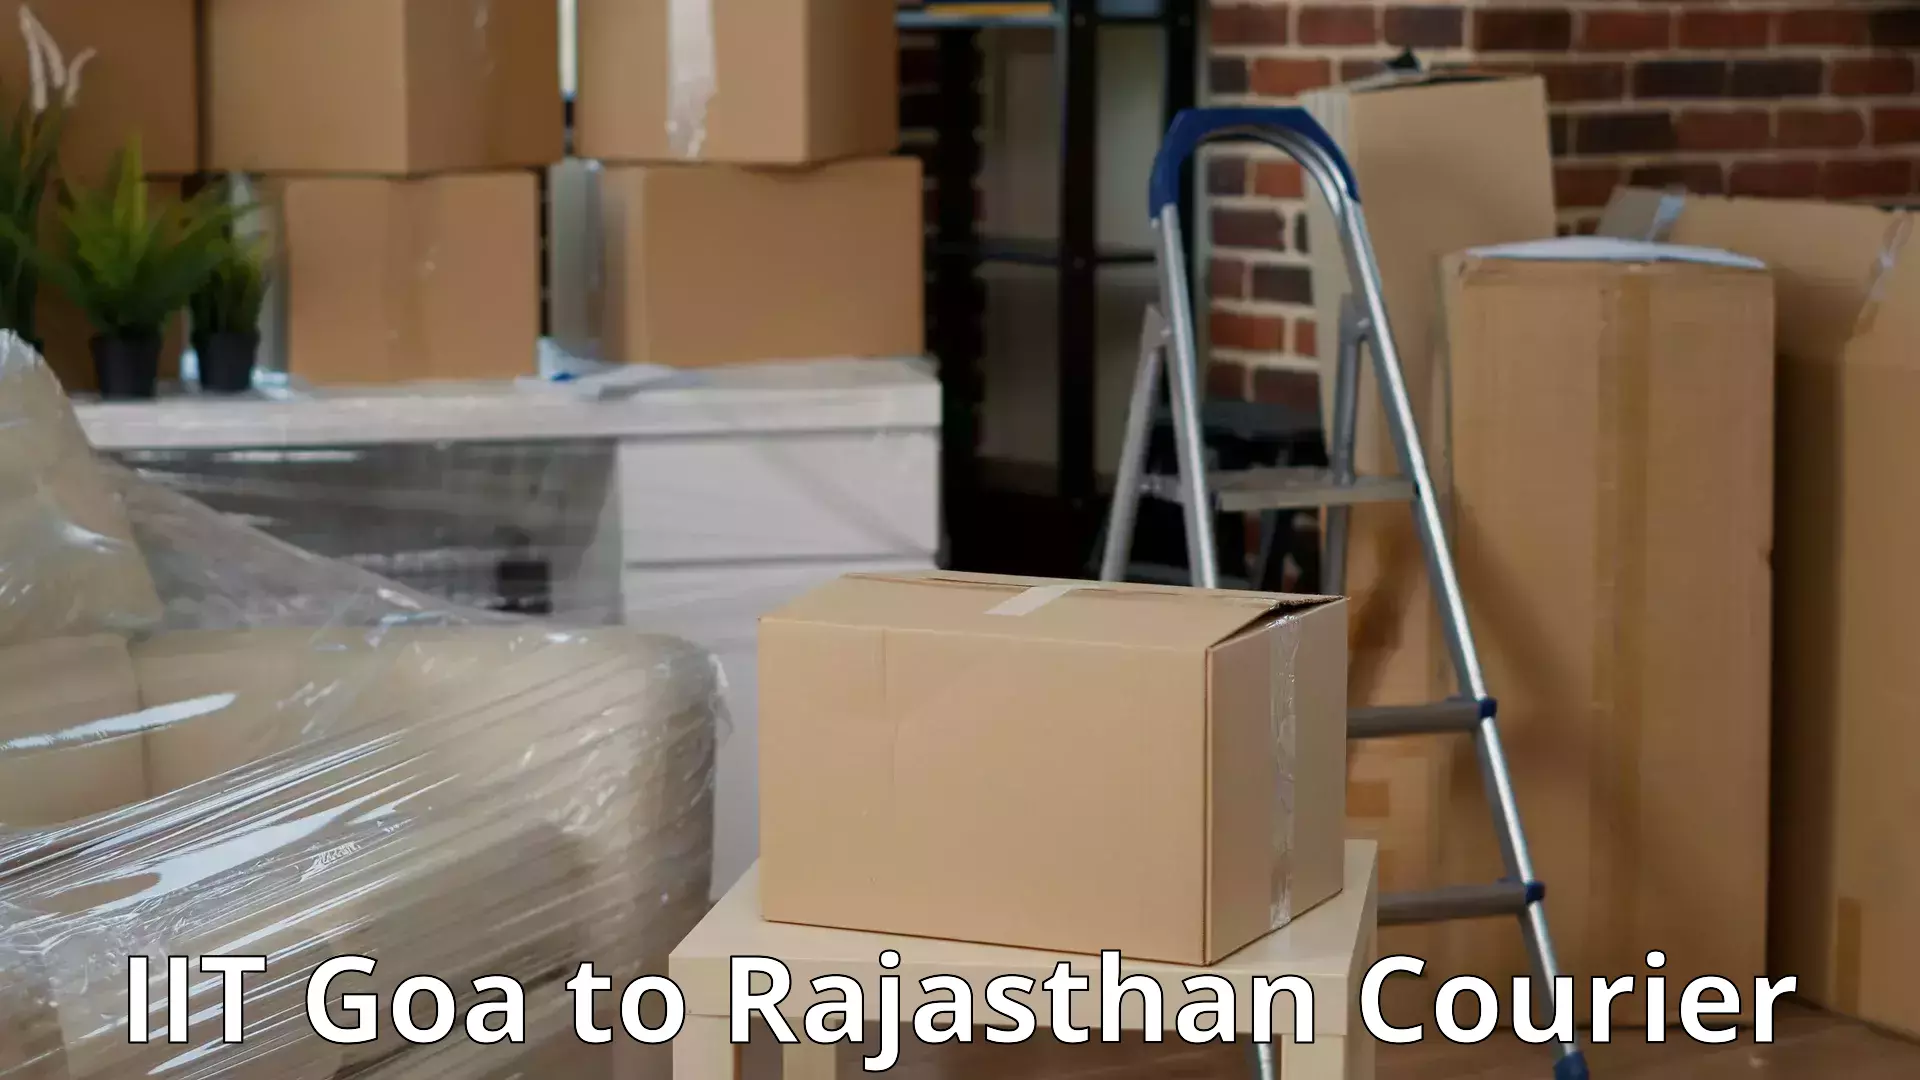 Quality moving and storage IIT Goa to Nagar